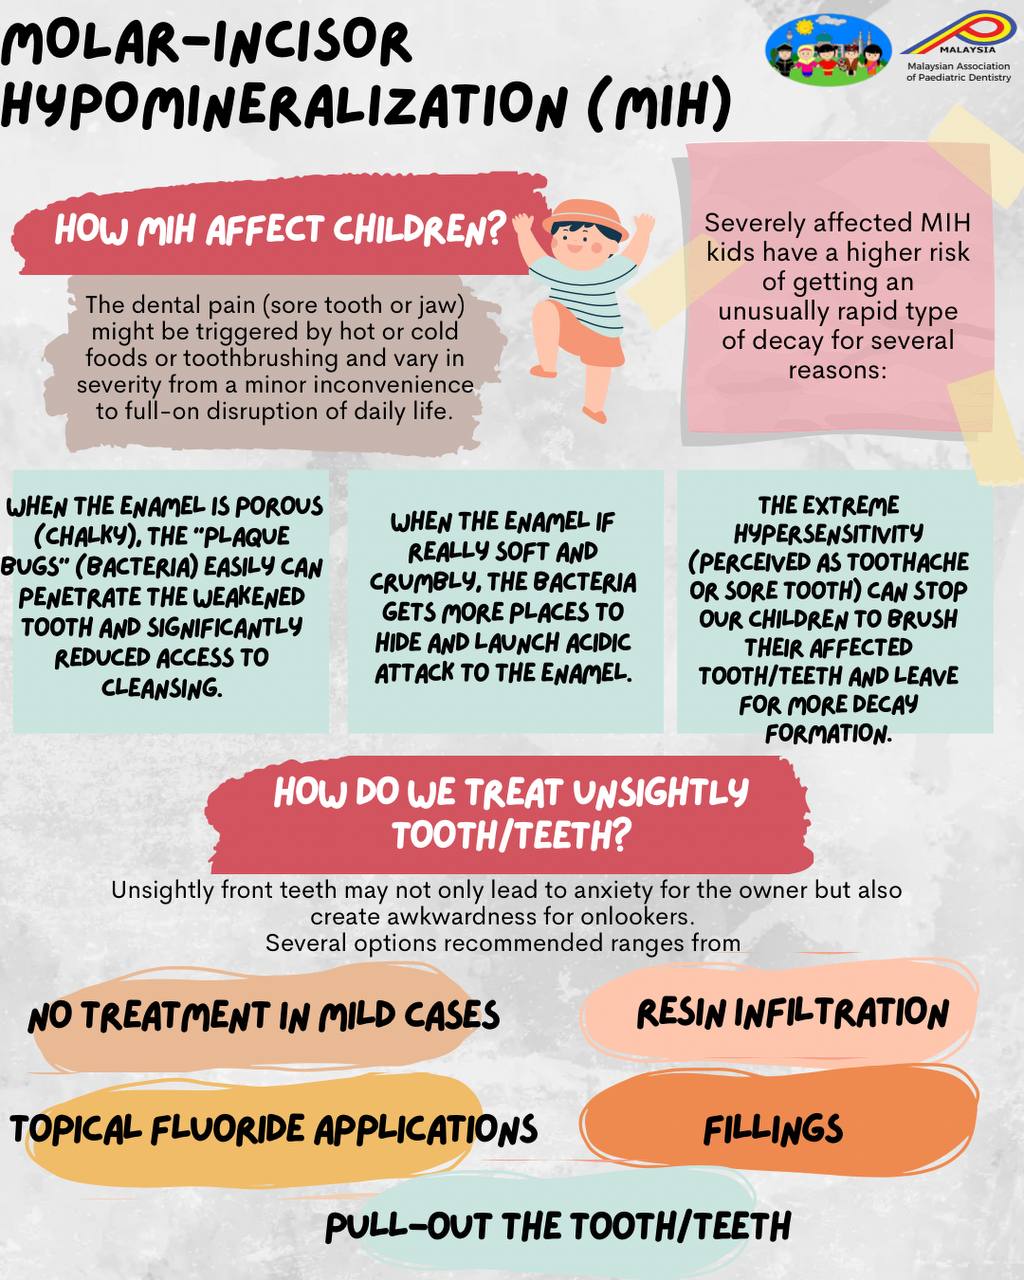 Molar-Incisor Hypomineralization (MIH) – How MIH Affect Children